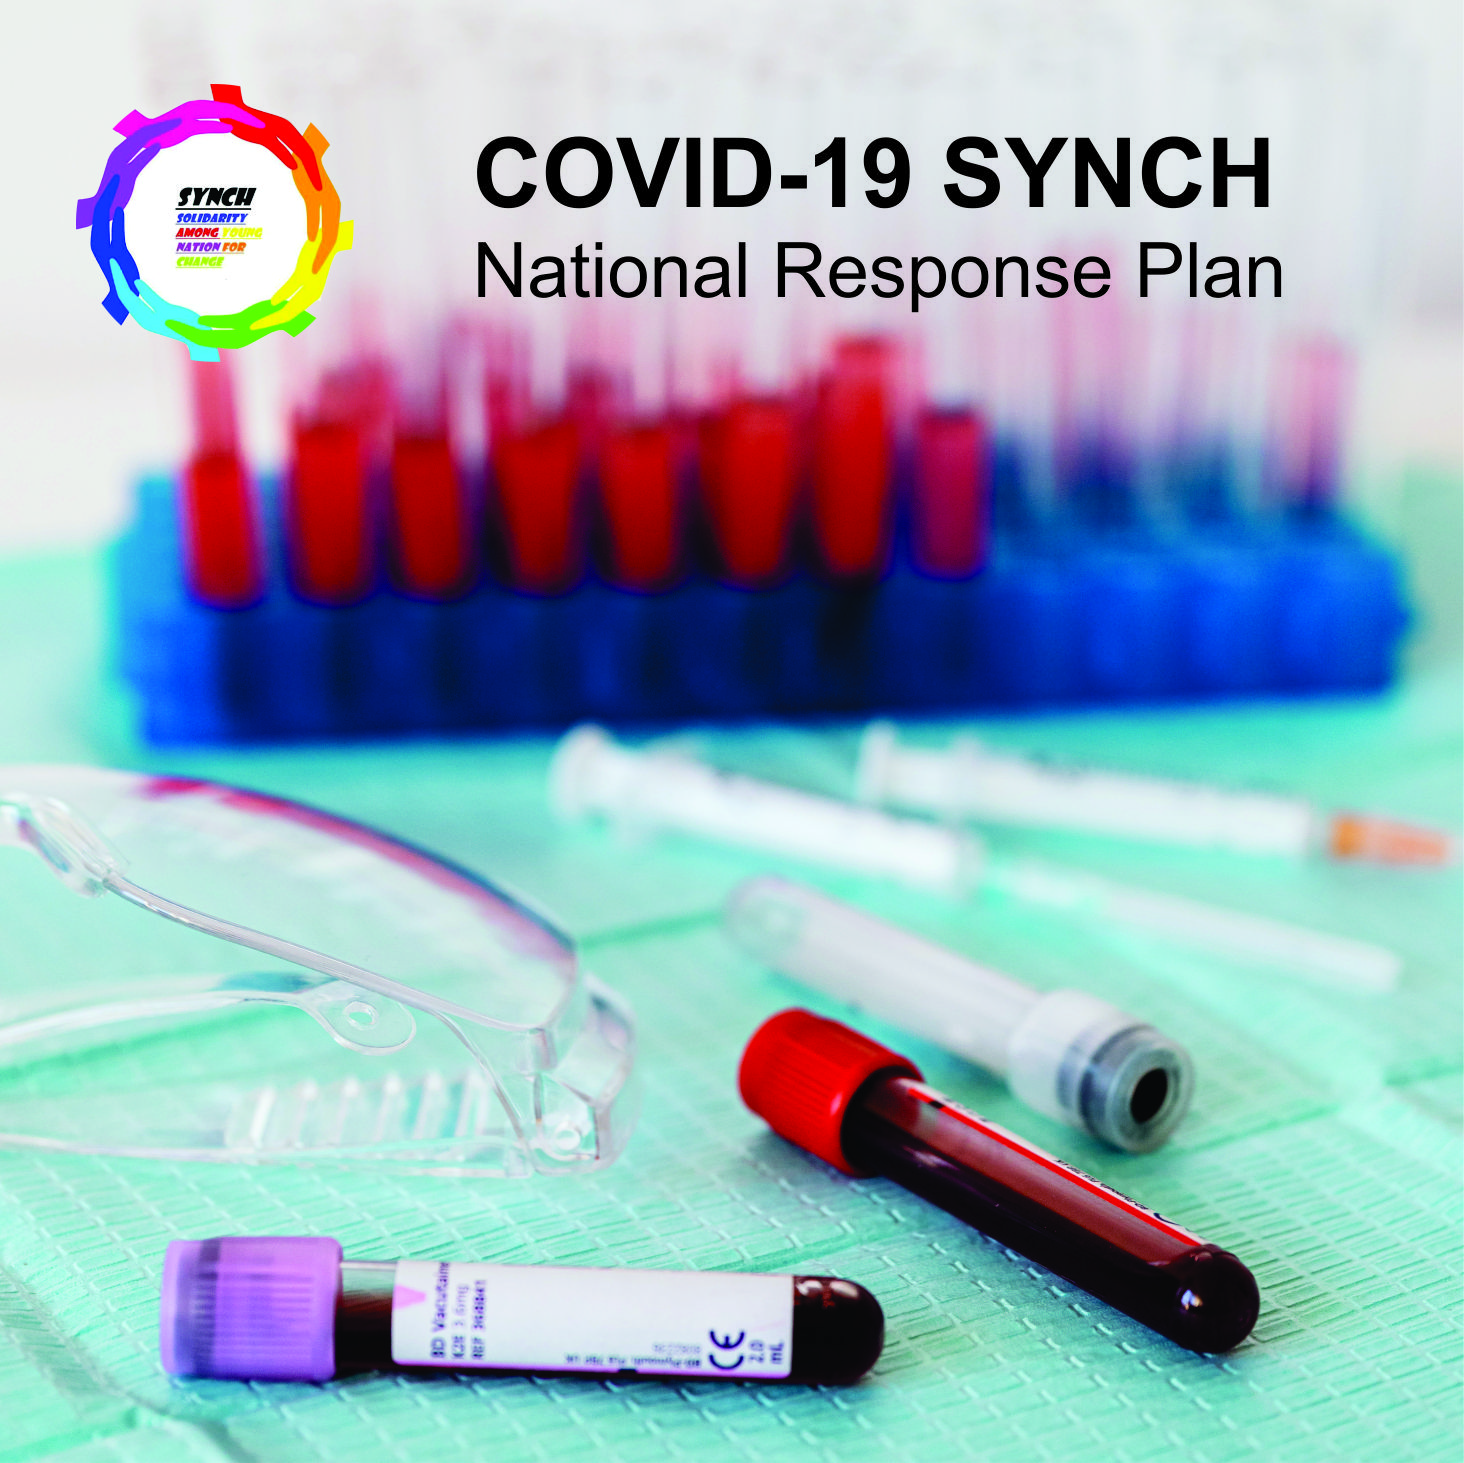 COVID-19 SYNCH National Response Plan